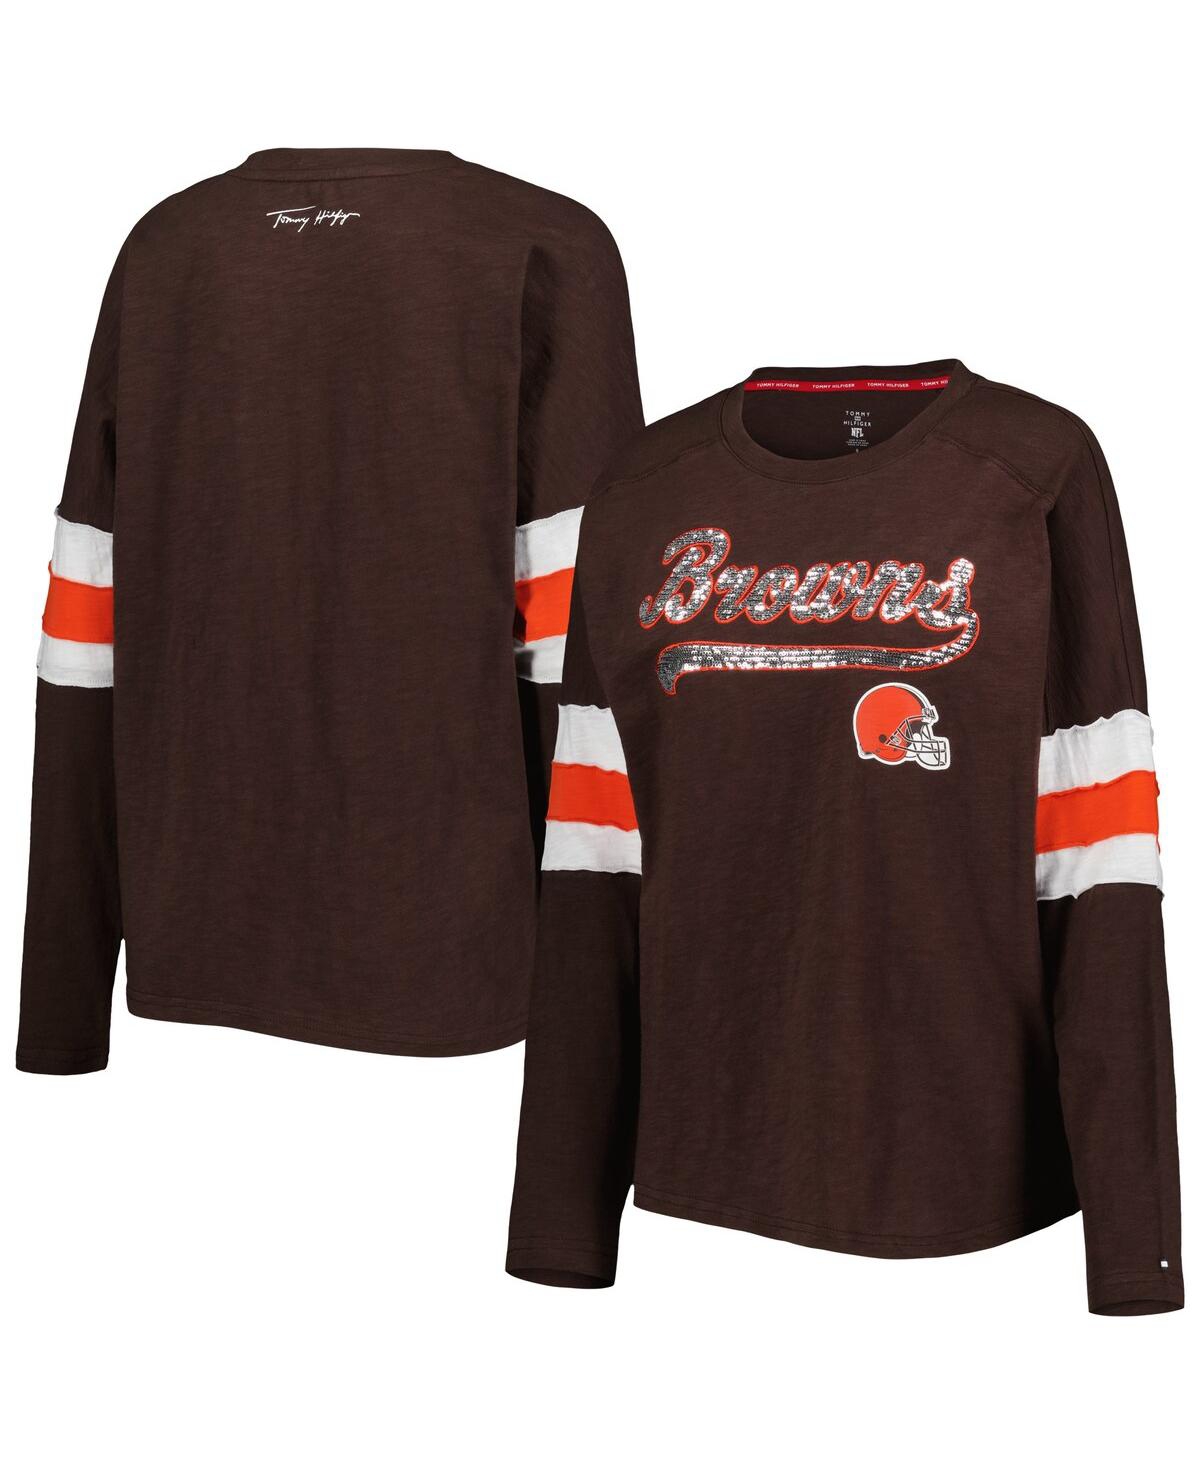 TOMMY HILFIGER WOMEN'S TOMMY HILFIGER BROWN CLEVELAND BROWNS JUSTINE LONG SLEEVE TUNIC T-SHIRT